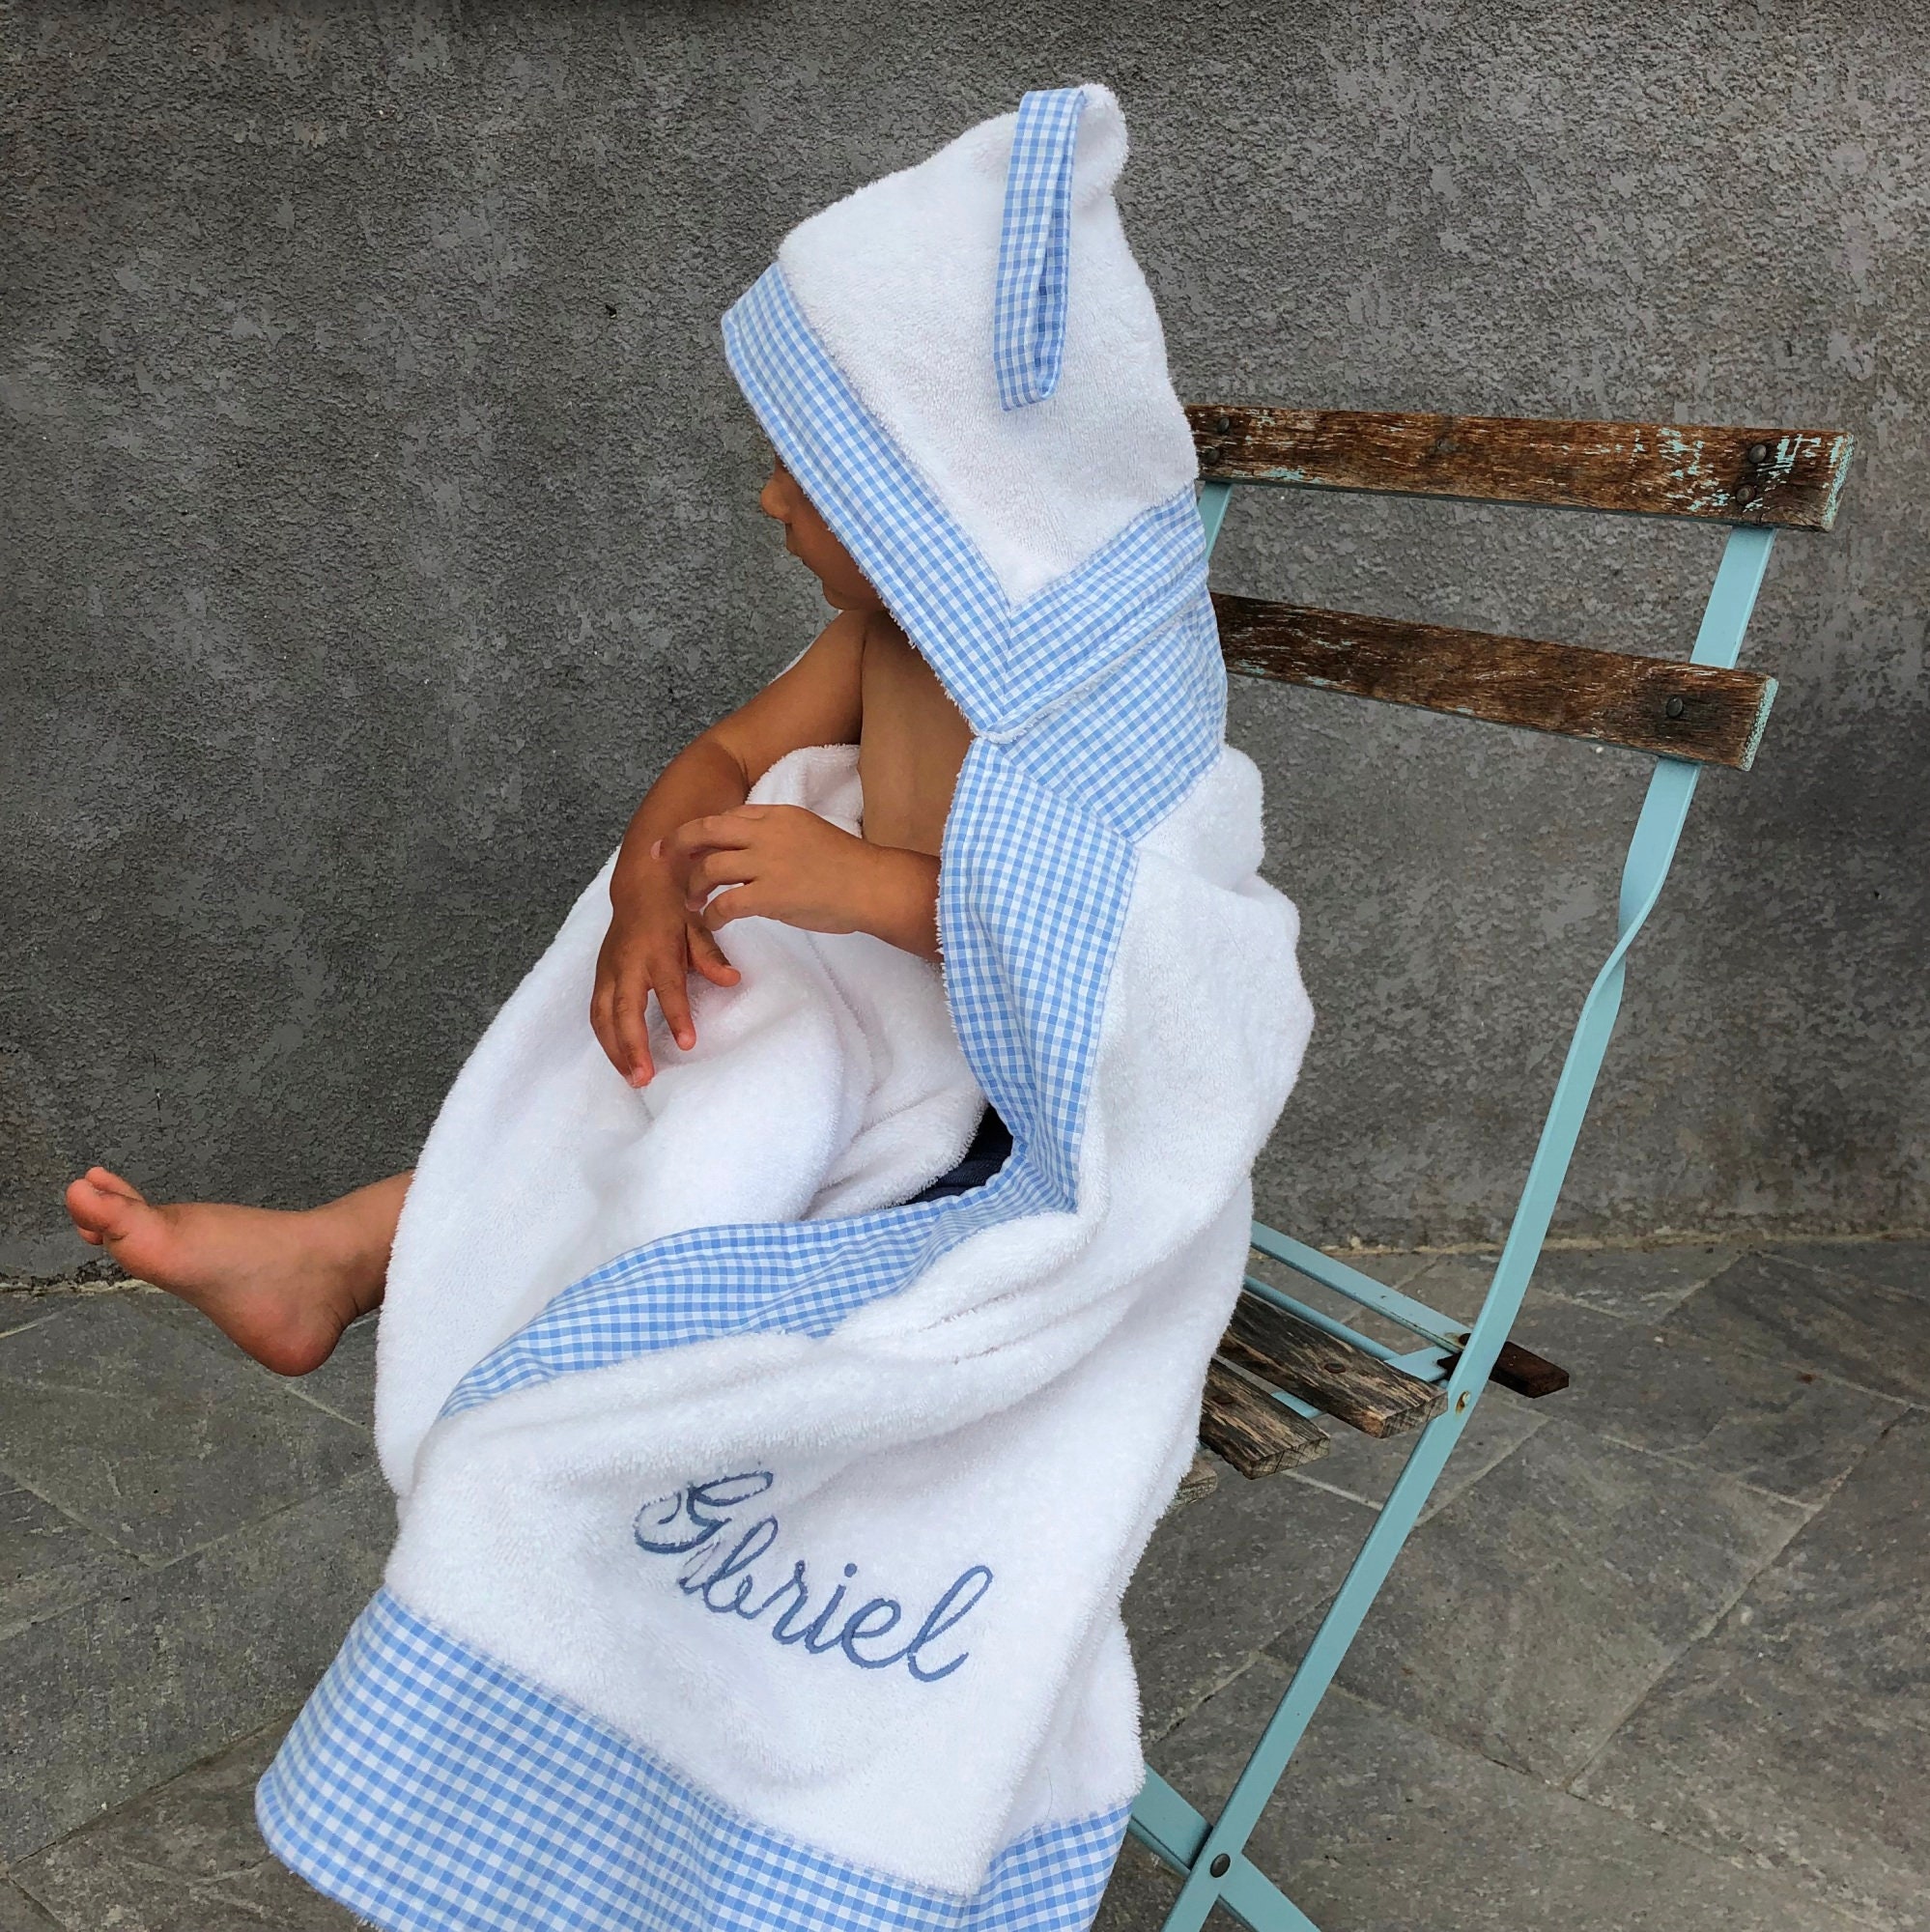 CRAB and Personalised Name Embroidered onto Towels Bath Robes Hooded Towel 